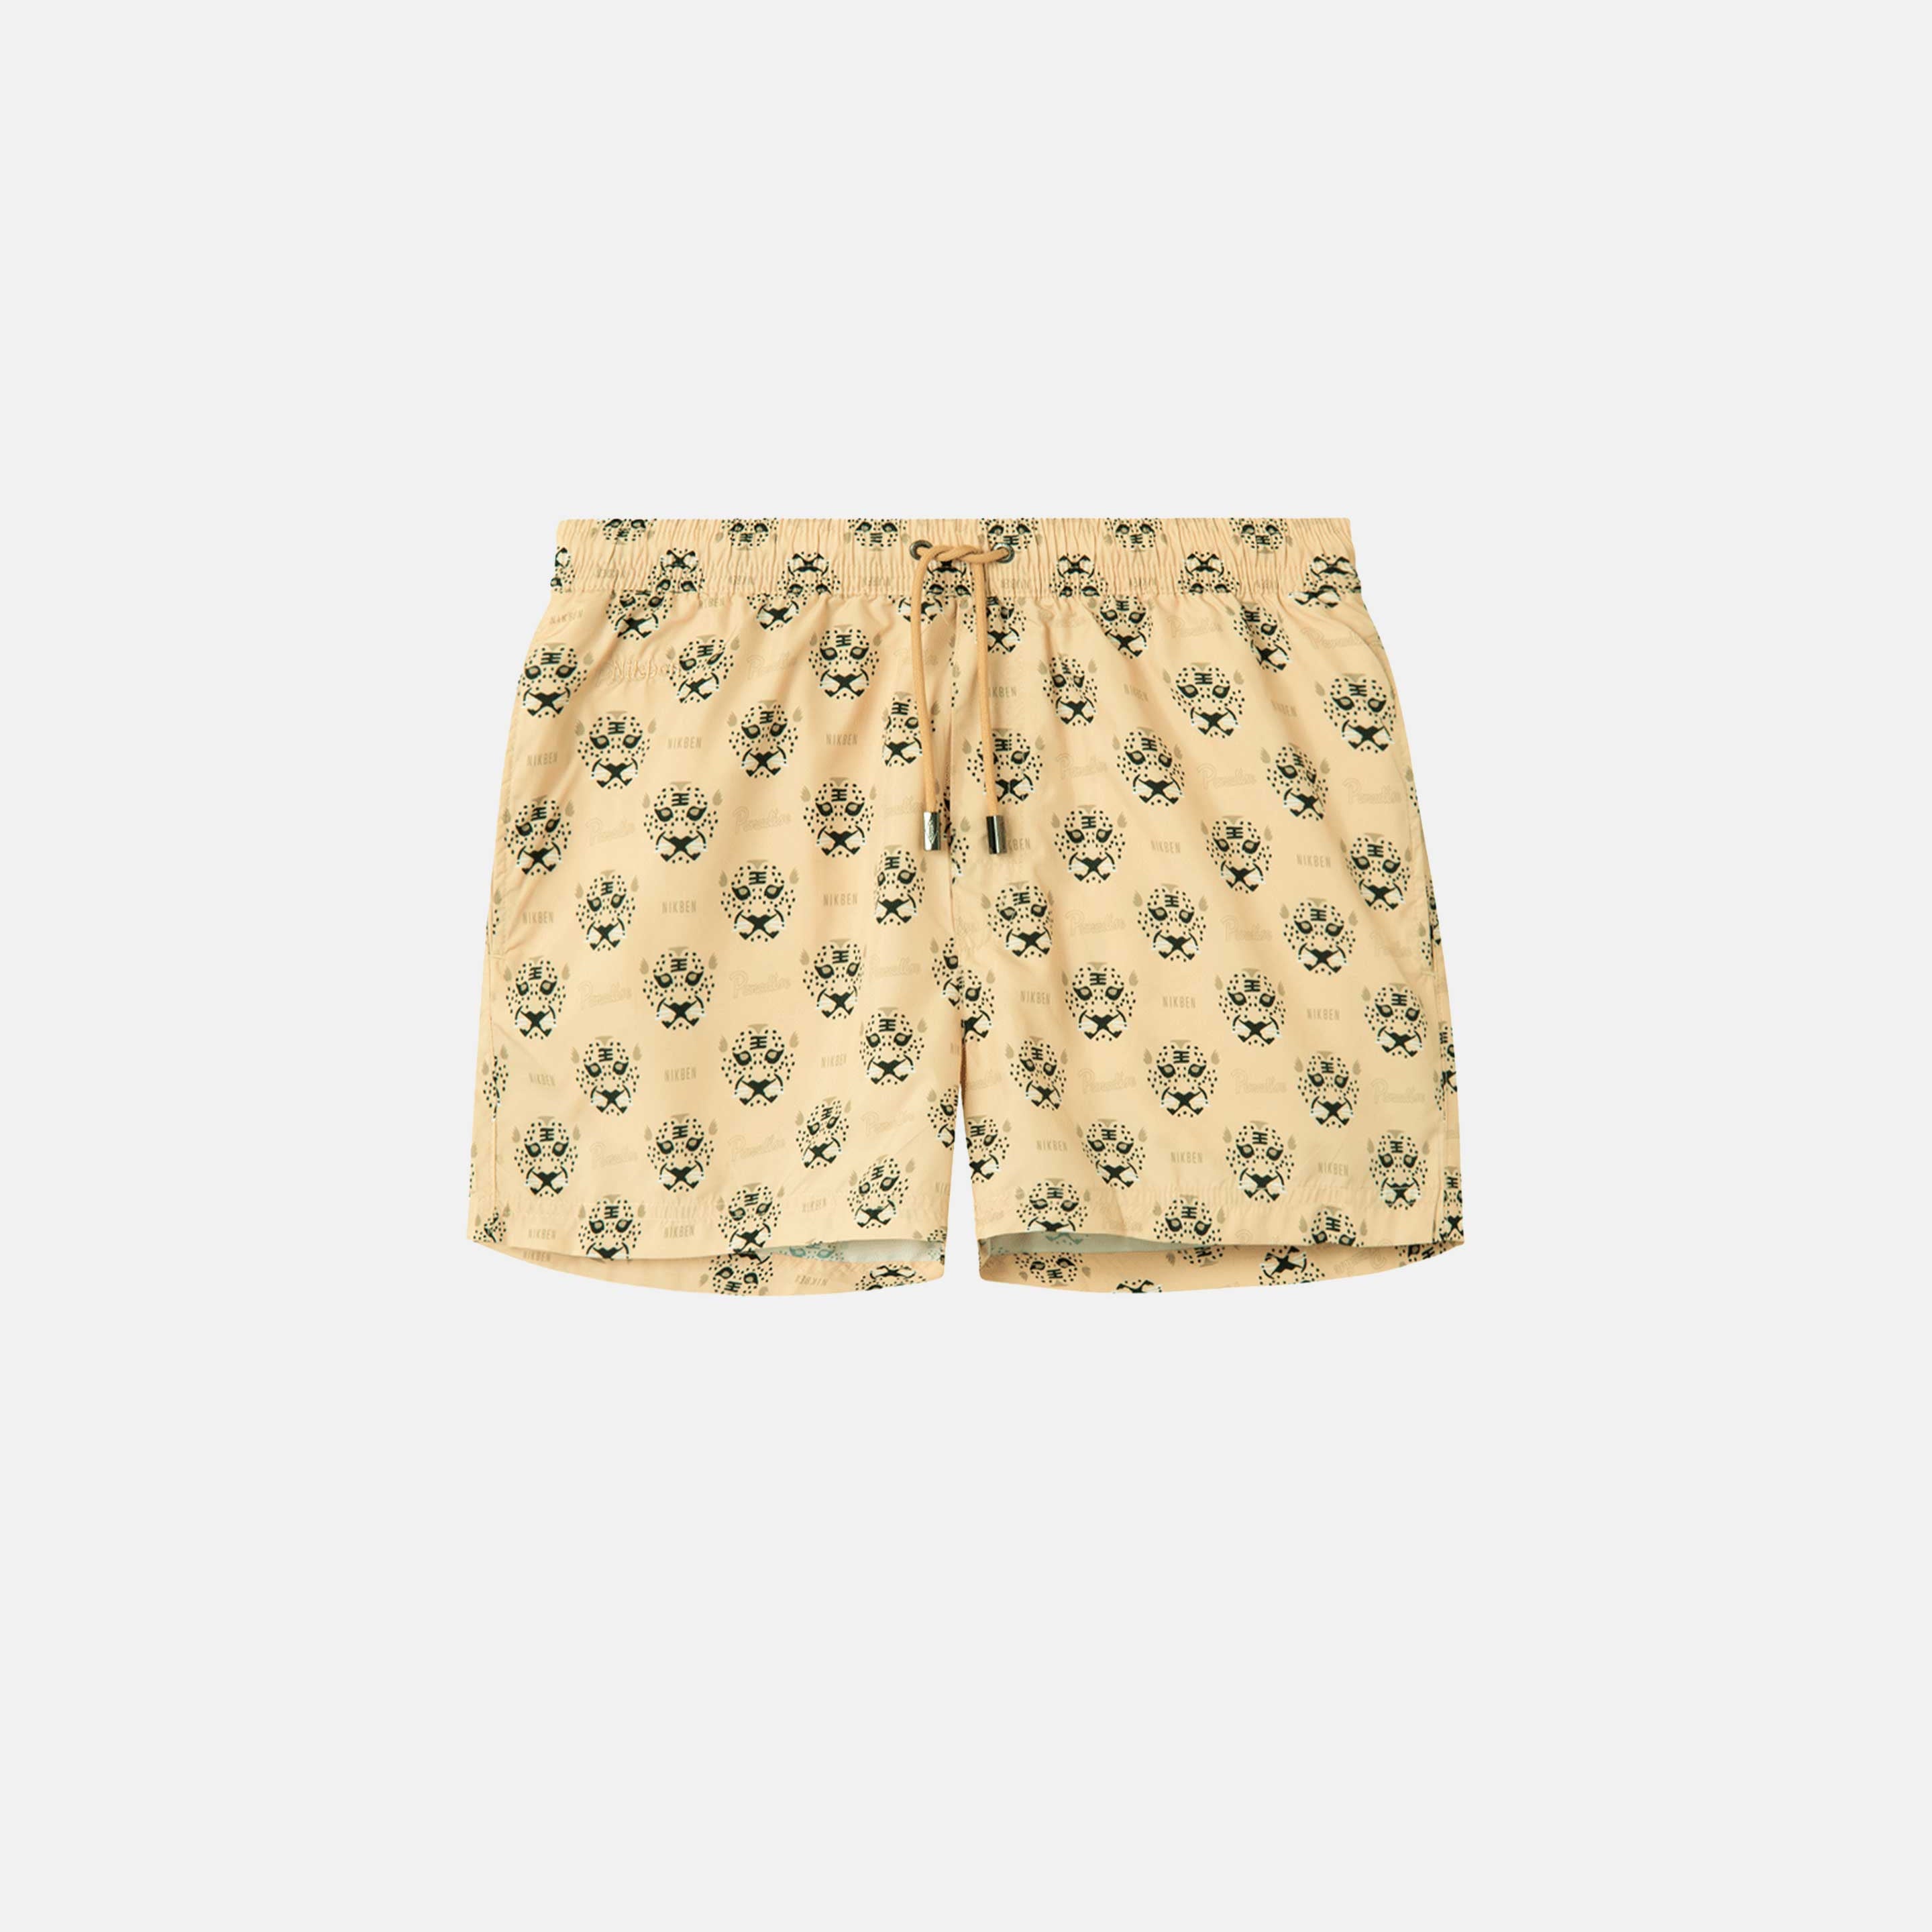 Beige swim trunks with leopard pattern print. Mid length shorts with drawstring waistband and two side pockets.